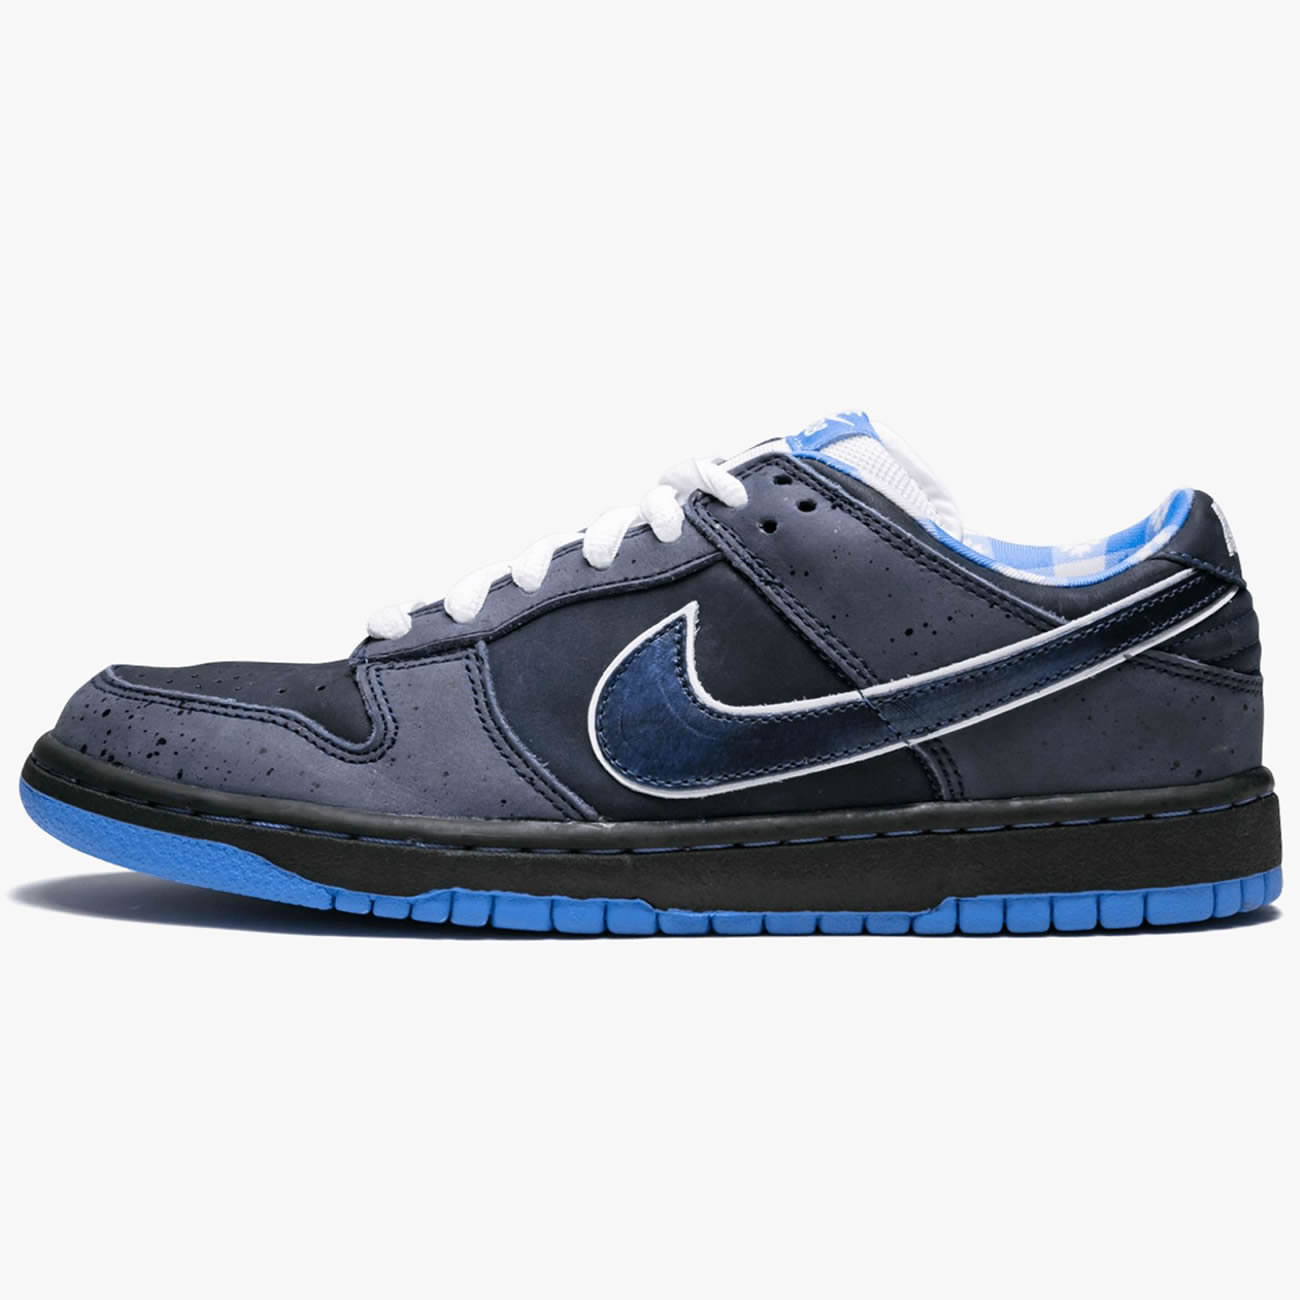 Nike Sb Dunk Low Concepts Bluelobster 313170 342 (1) - newkick.org